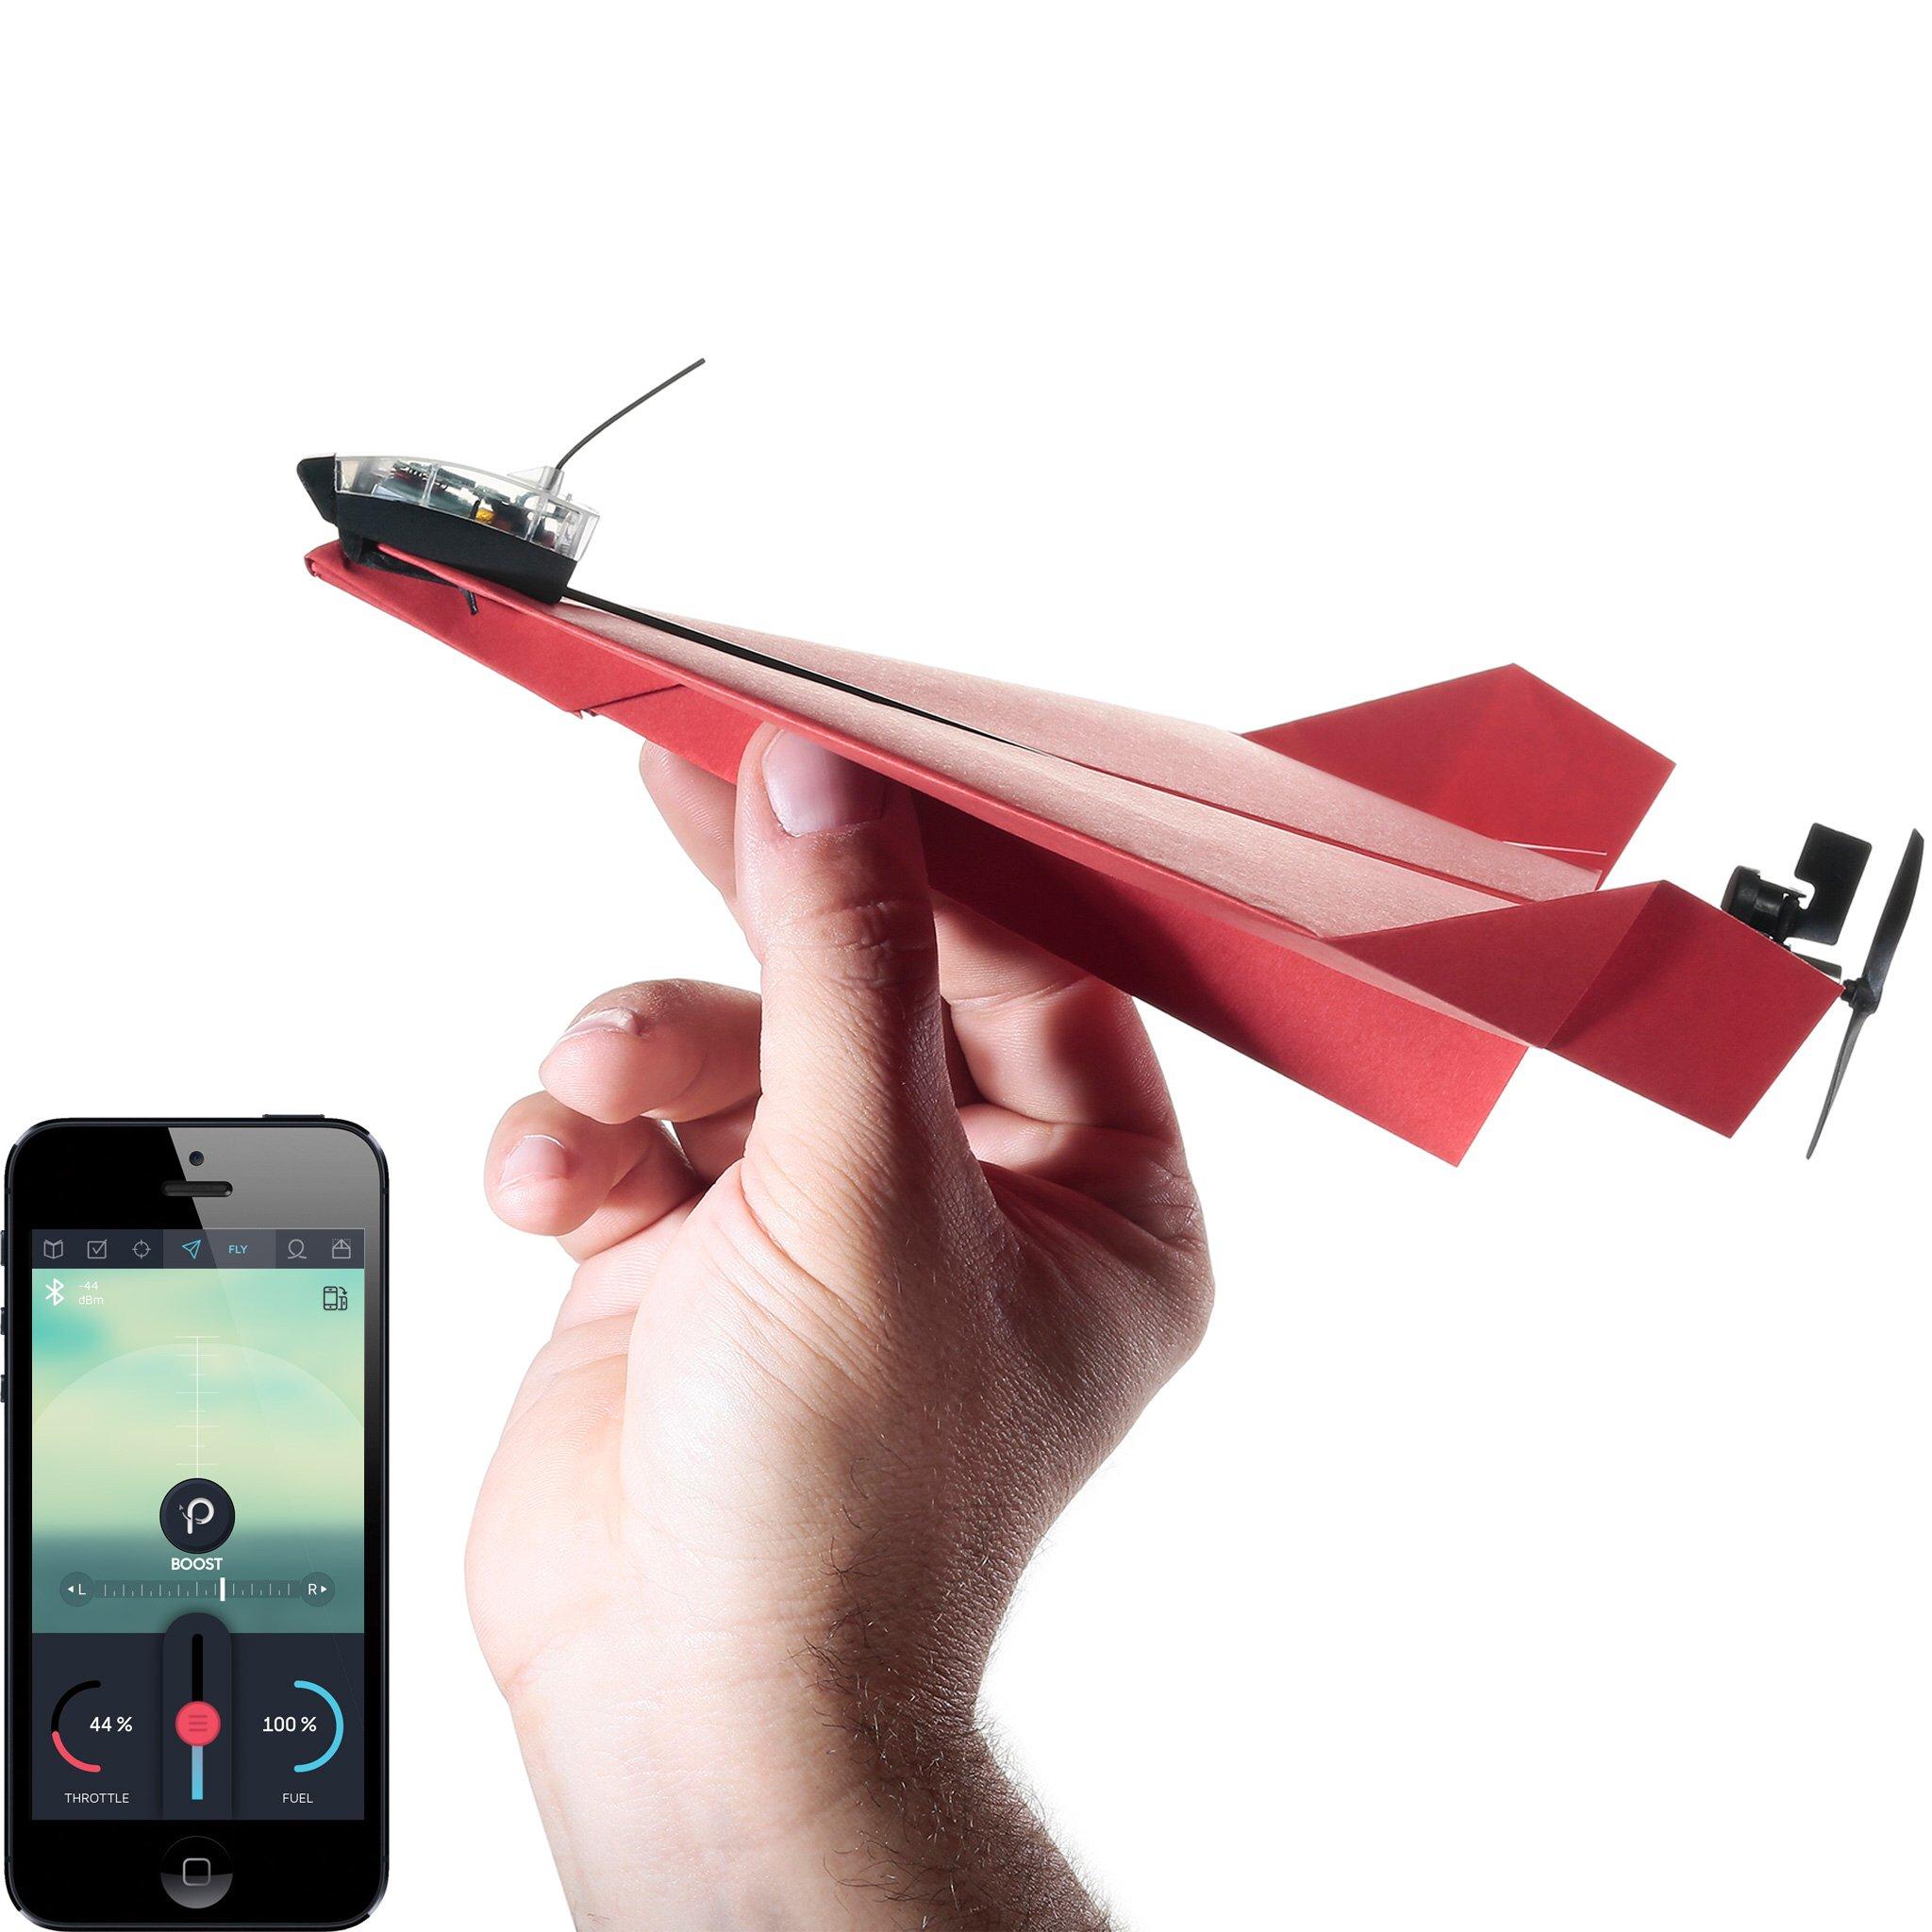 Rc Paper Plane: Comparison with Traditional Paper Planes Allows for Longer Flights